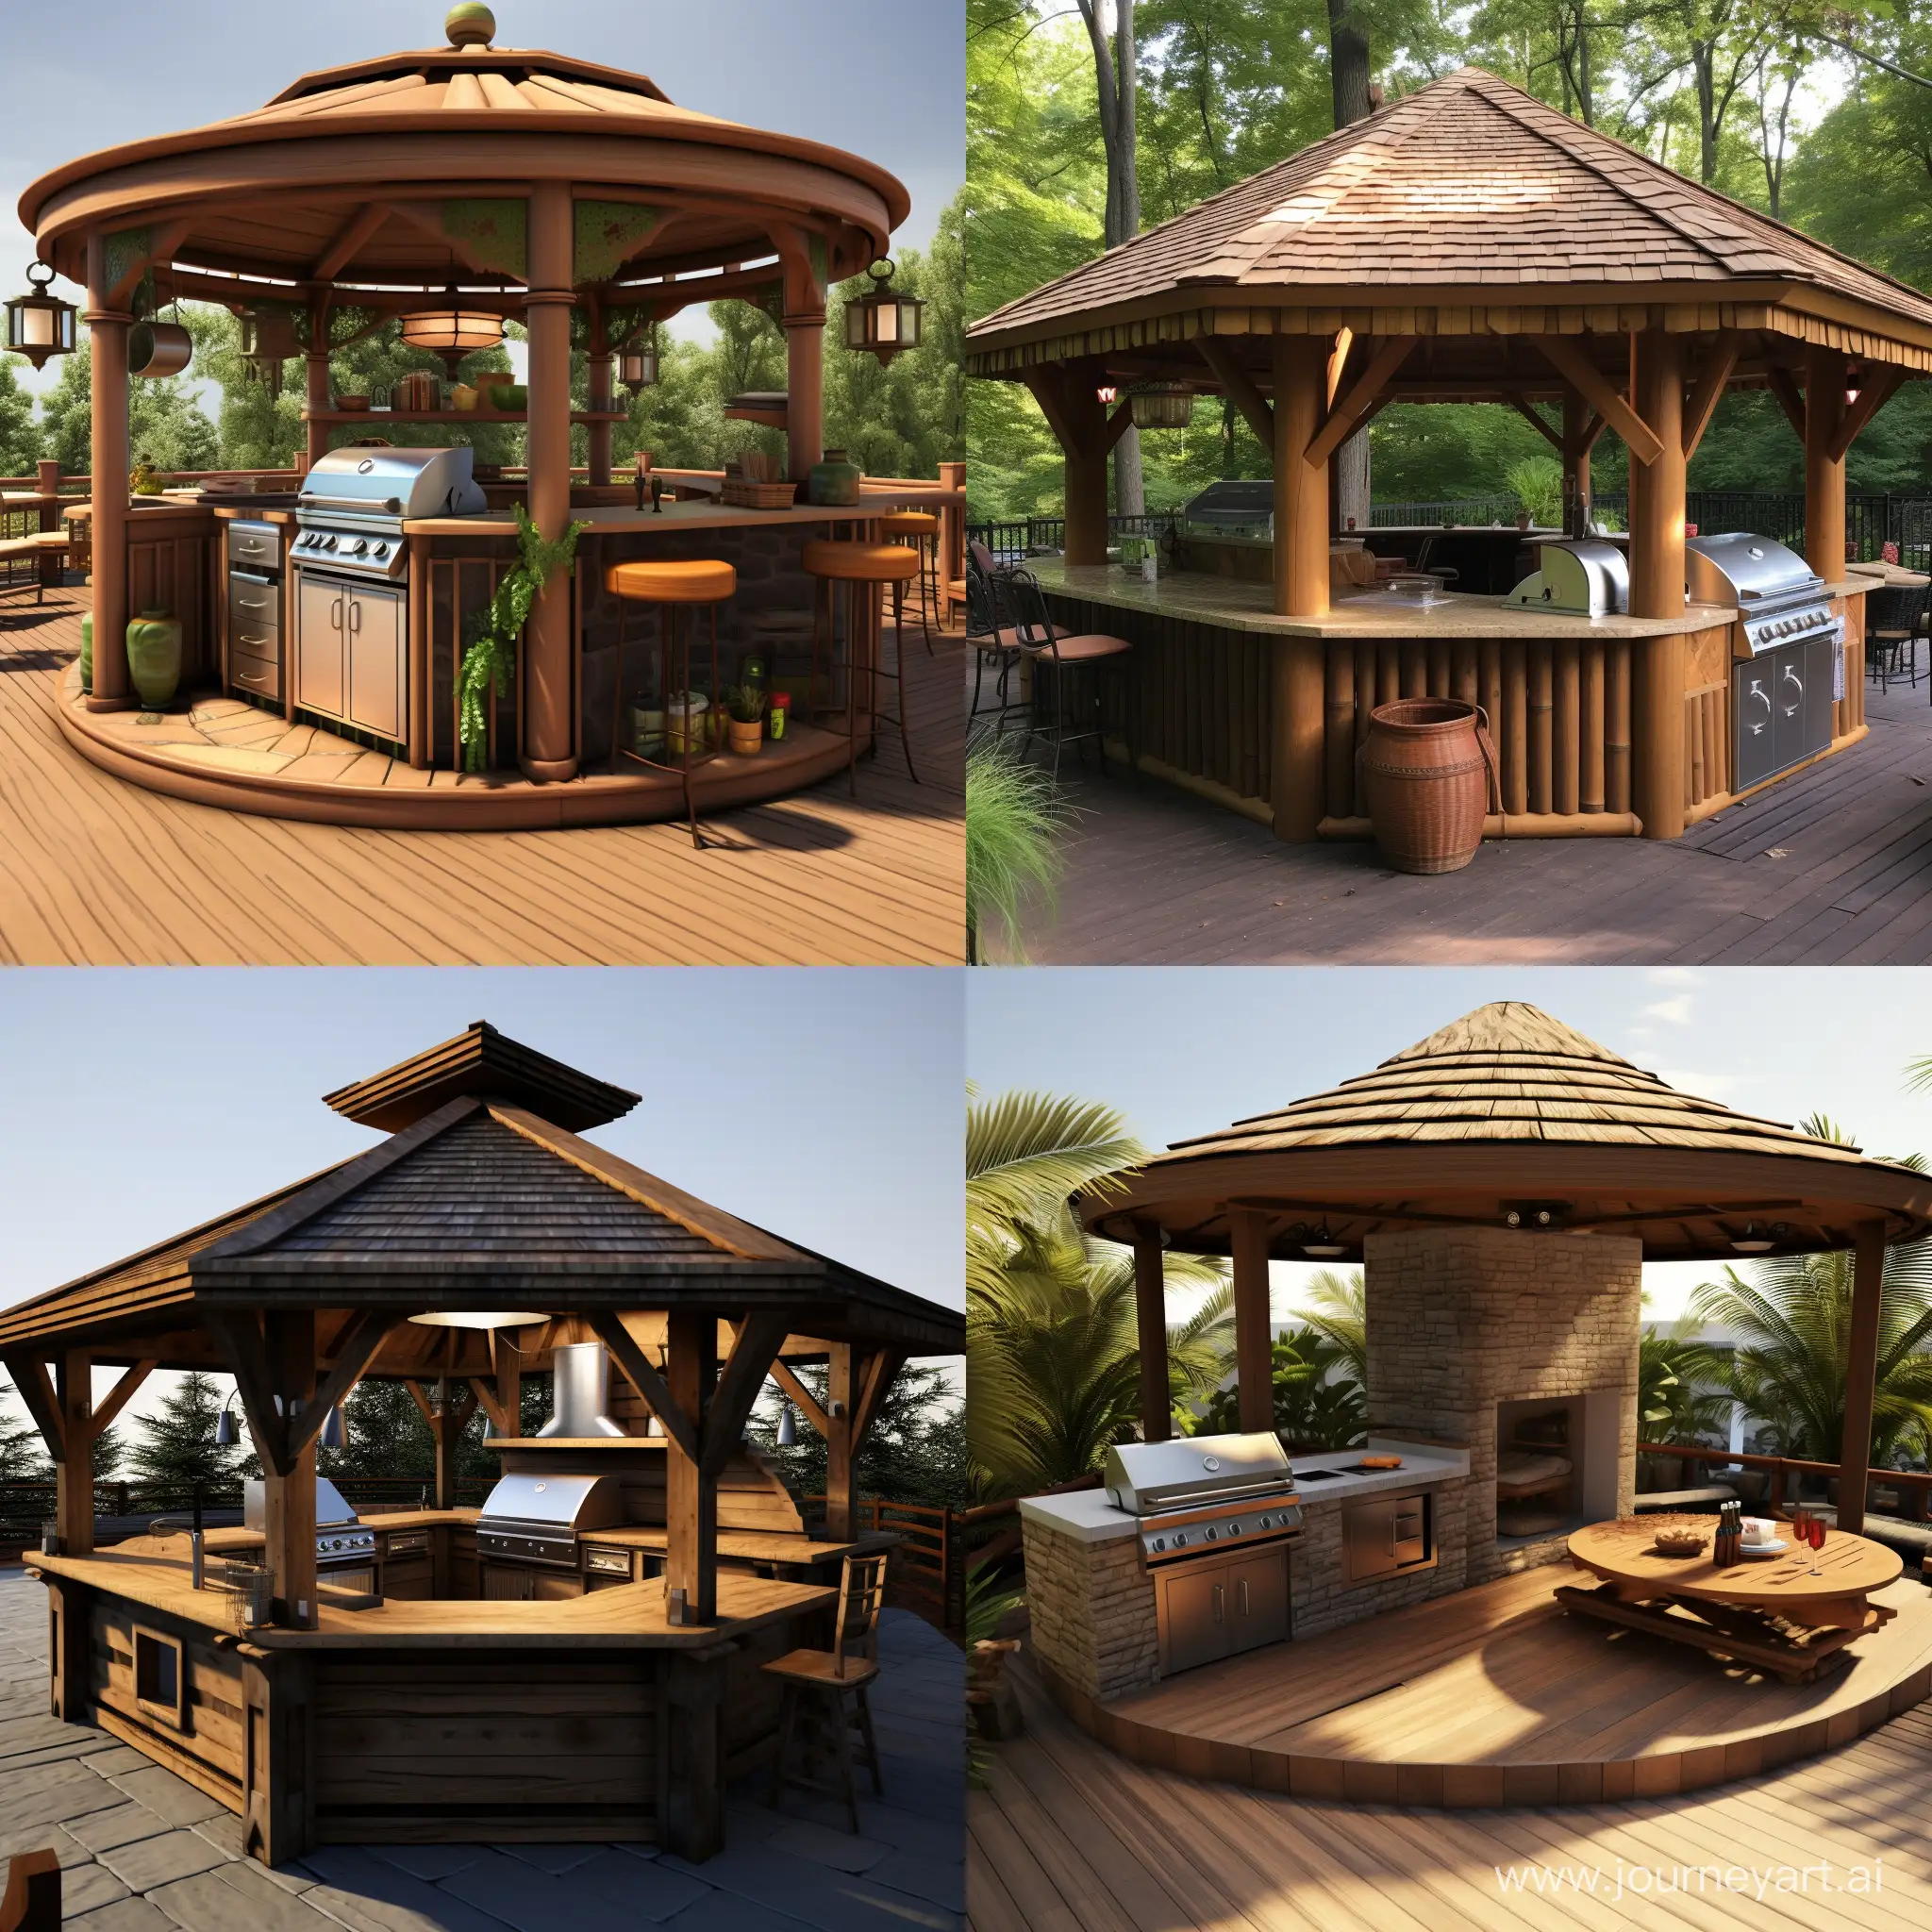 Rustic-12x12-Outdoor-Gazebo-Kitchen-with-Grill-and-Sink